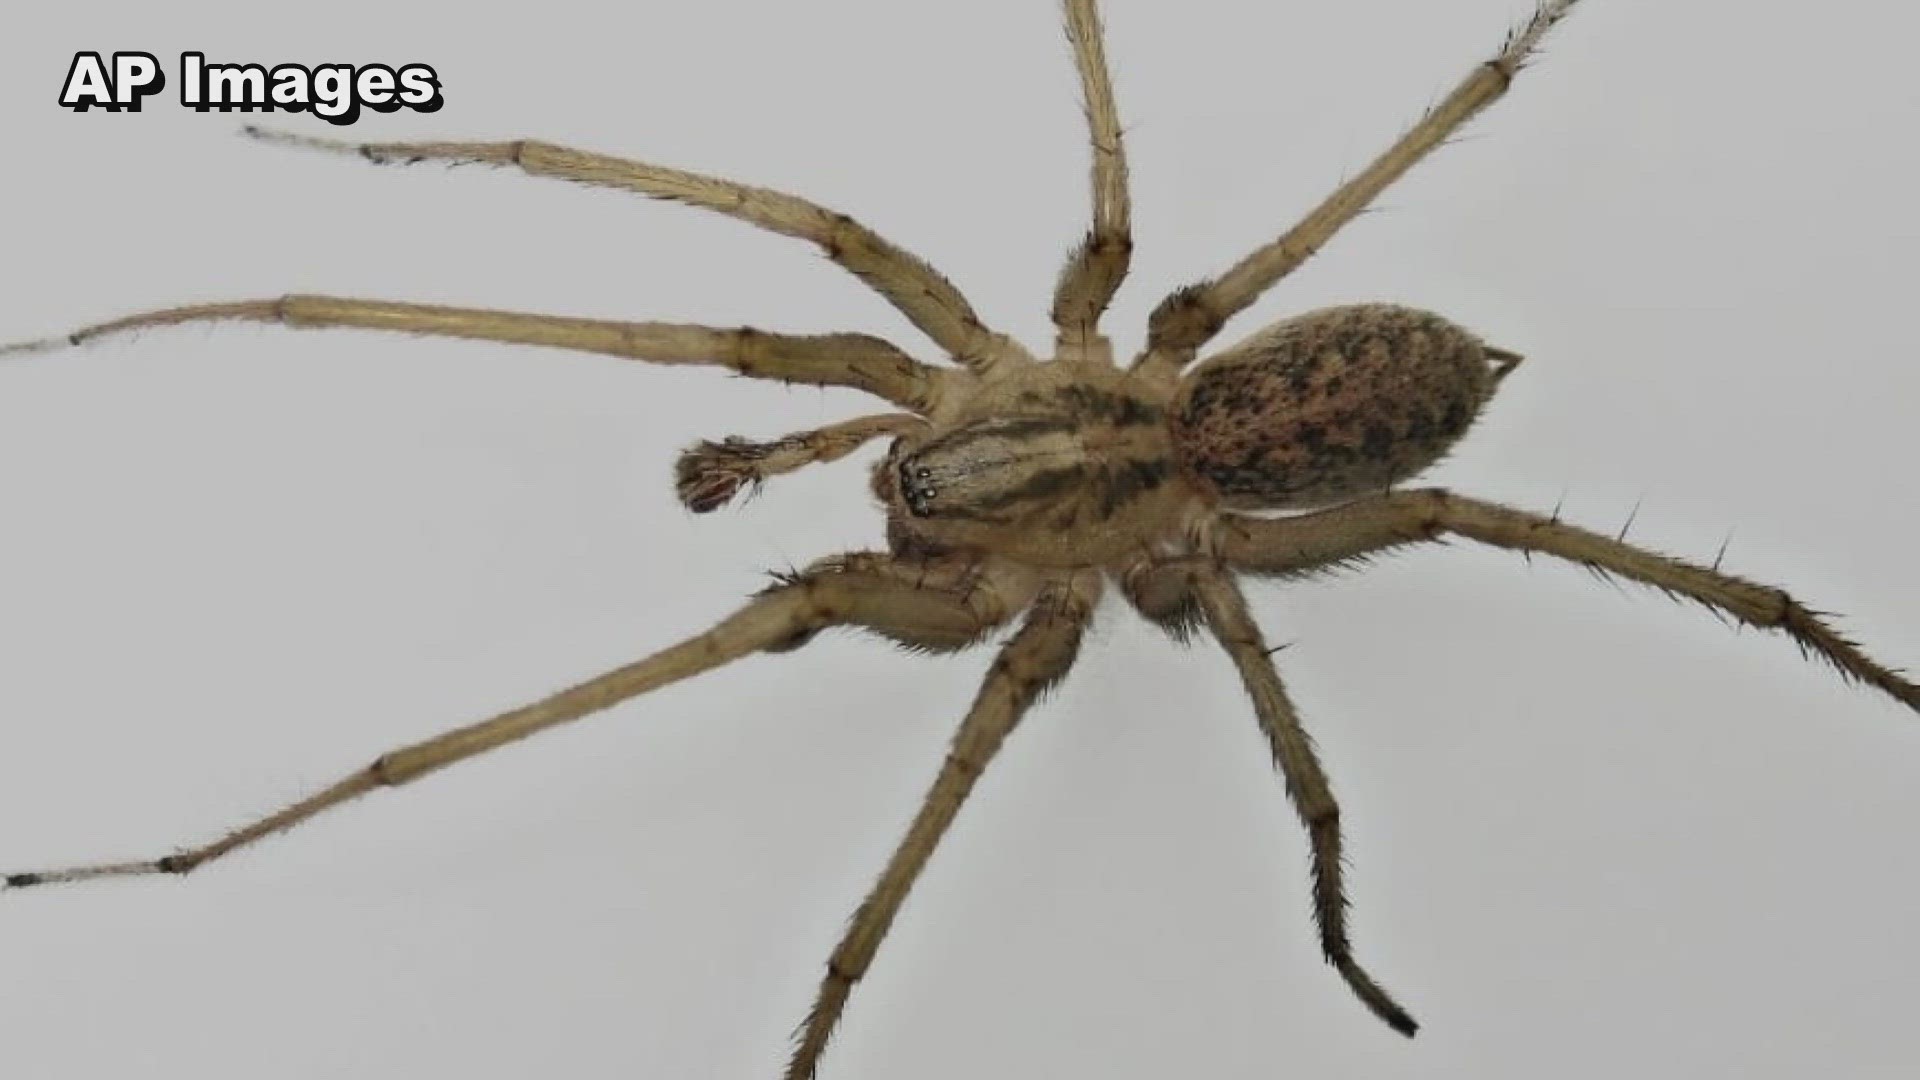 Brown recluse spiders are being spotted across Central Texas, partly due to the summer heat. Here's what to know about the potentially dangerous spiders.